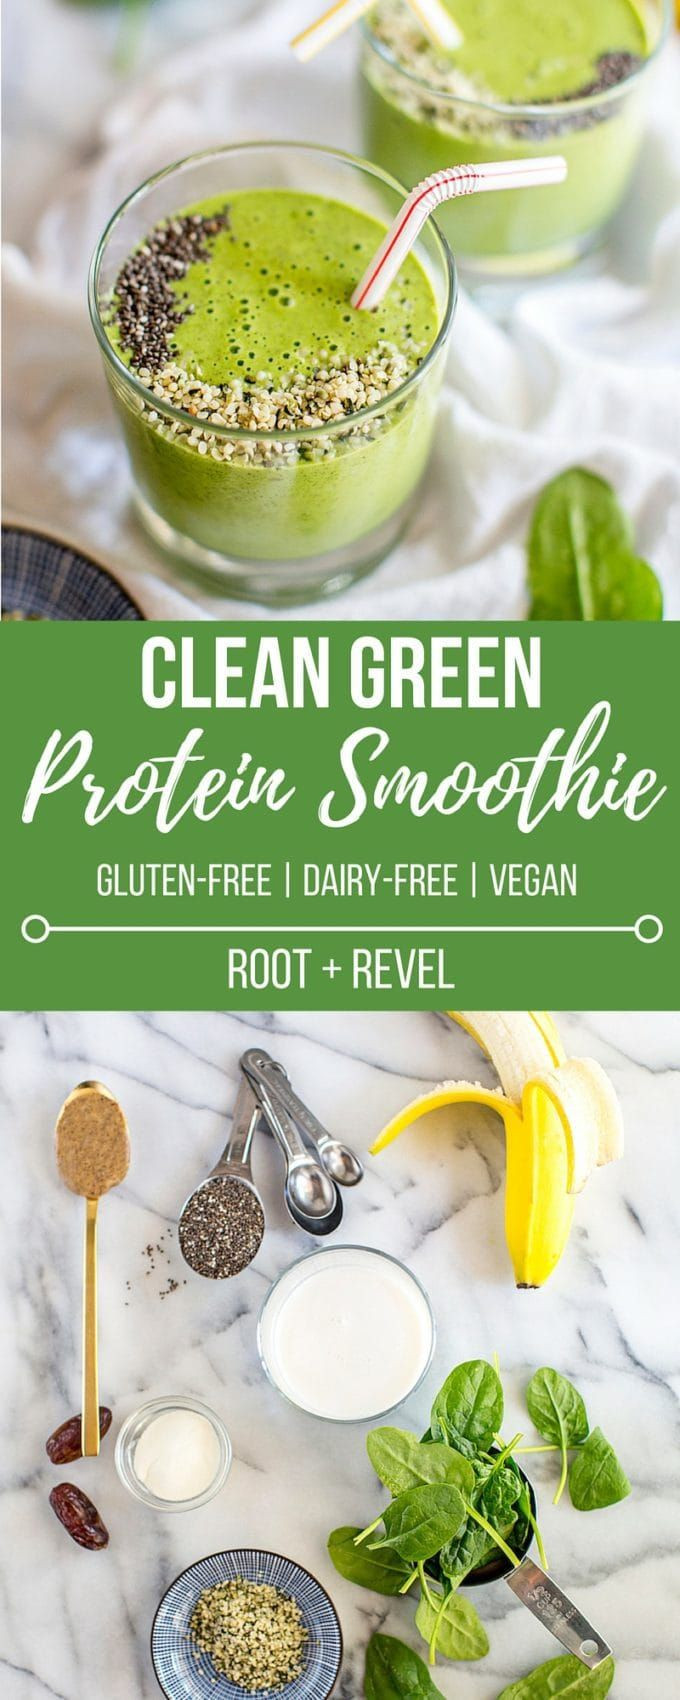 Dairy Free Smoothies For Weight Loss
 Green Vegan Protein Smoothie Recipe in 2020